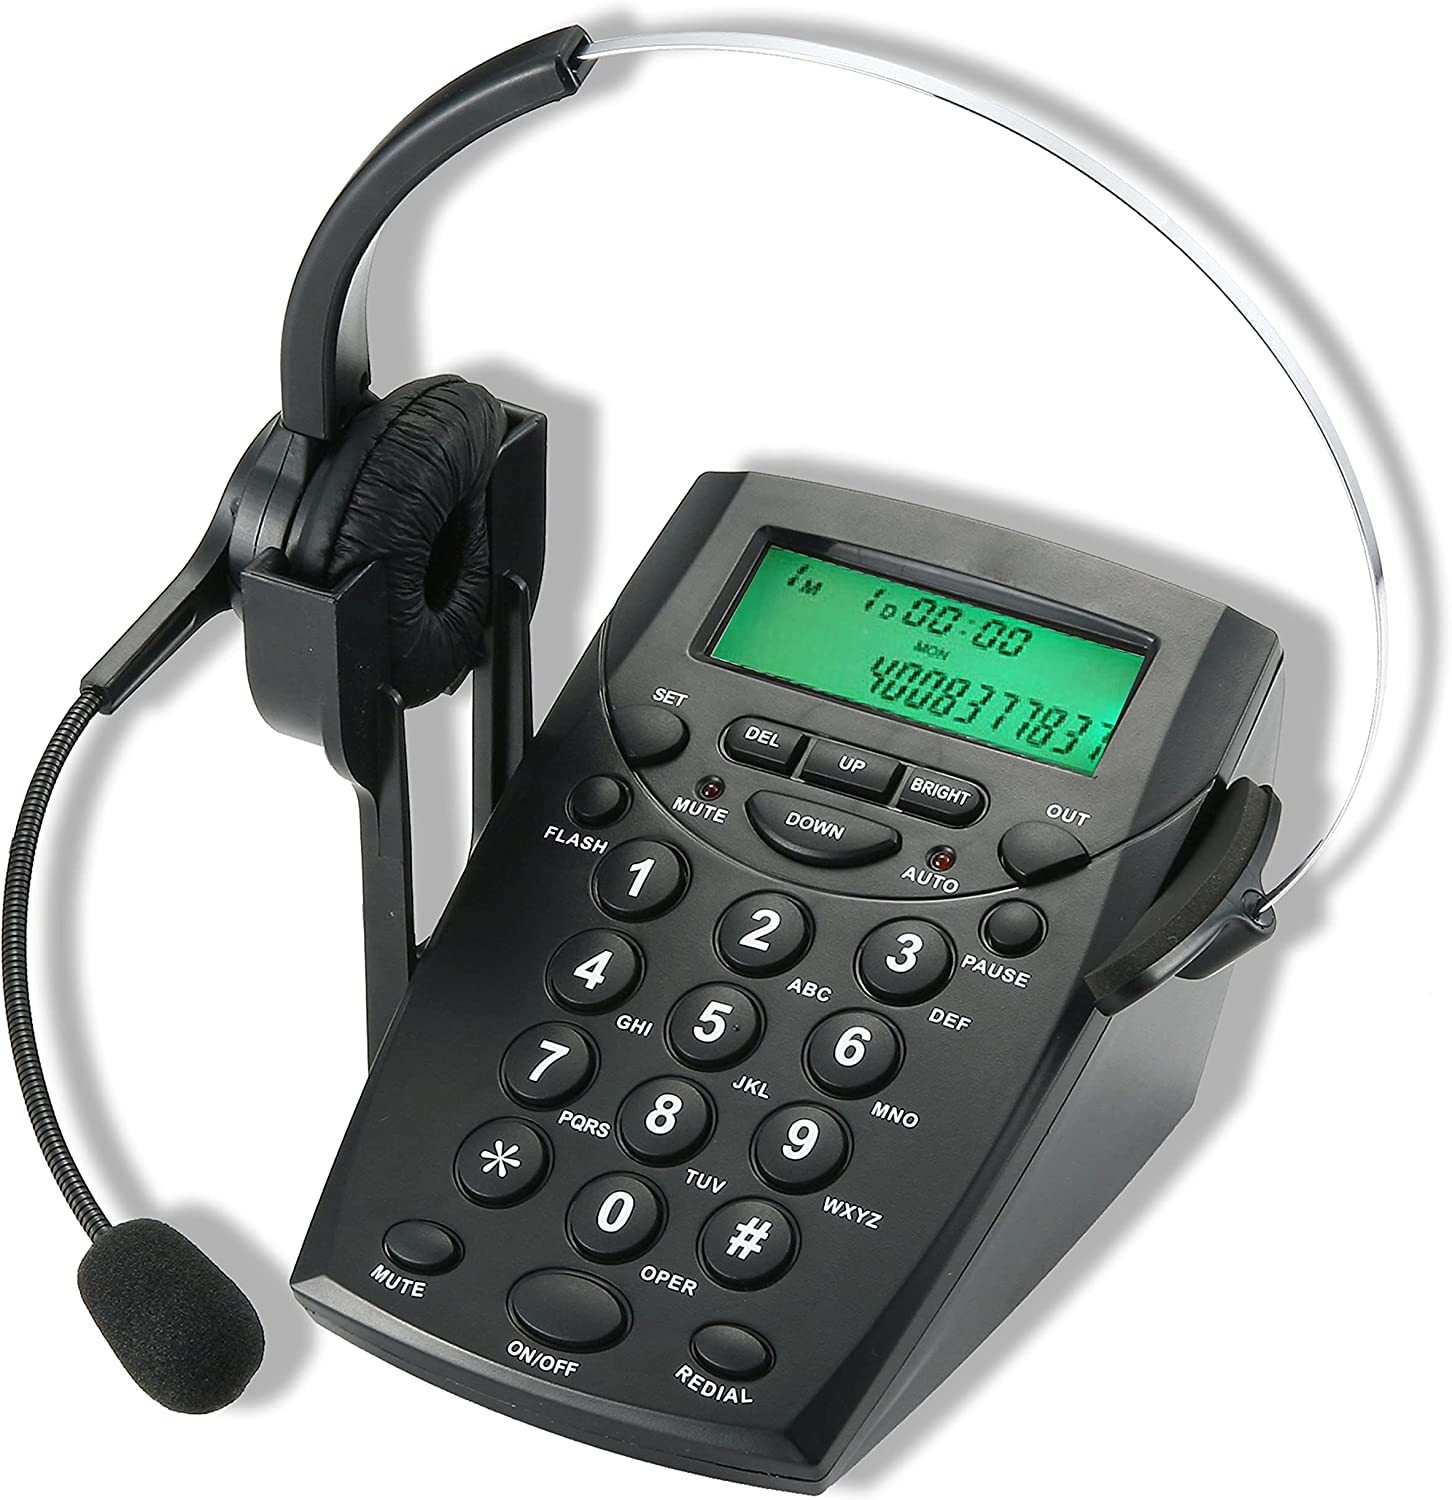 Primary image for Benotek Call Center Headset Telephone With Noise Cancellation Headphone, 5001.